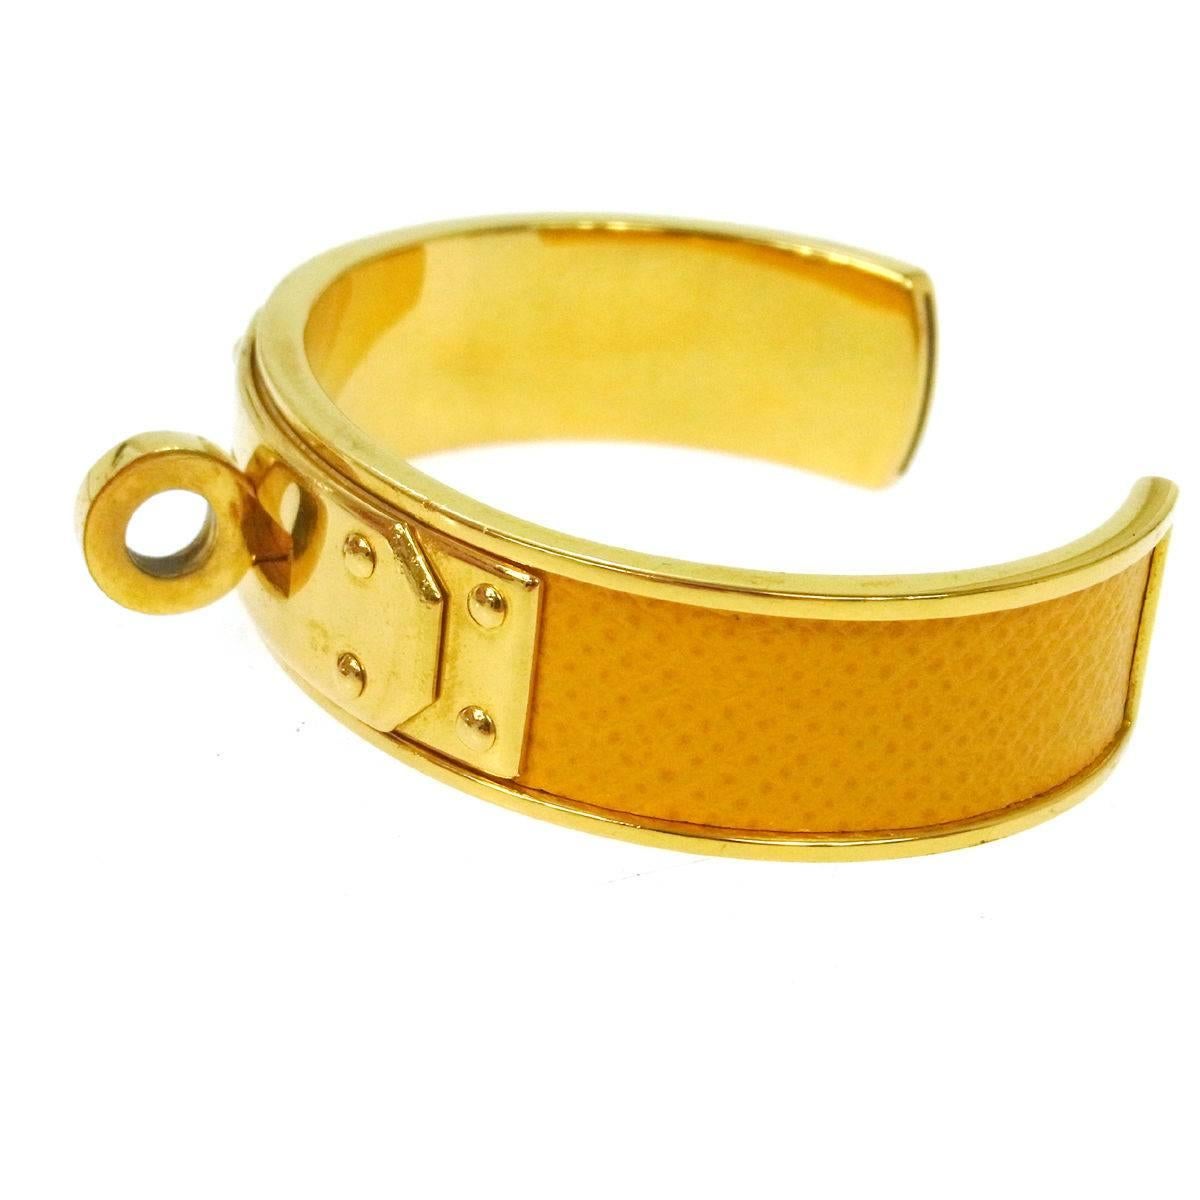 CURATOR'S NOTES

Leather
Metal
Gold tone
Slip on closure
Width 0.5"
Inner circumference ~6"

Shop Newfound Luxury for authentic Hermes cuff bracelets.